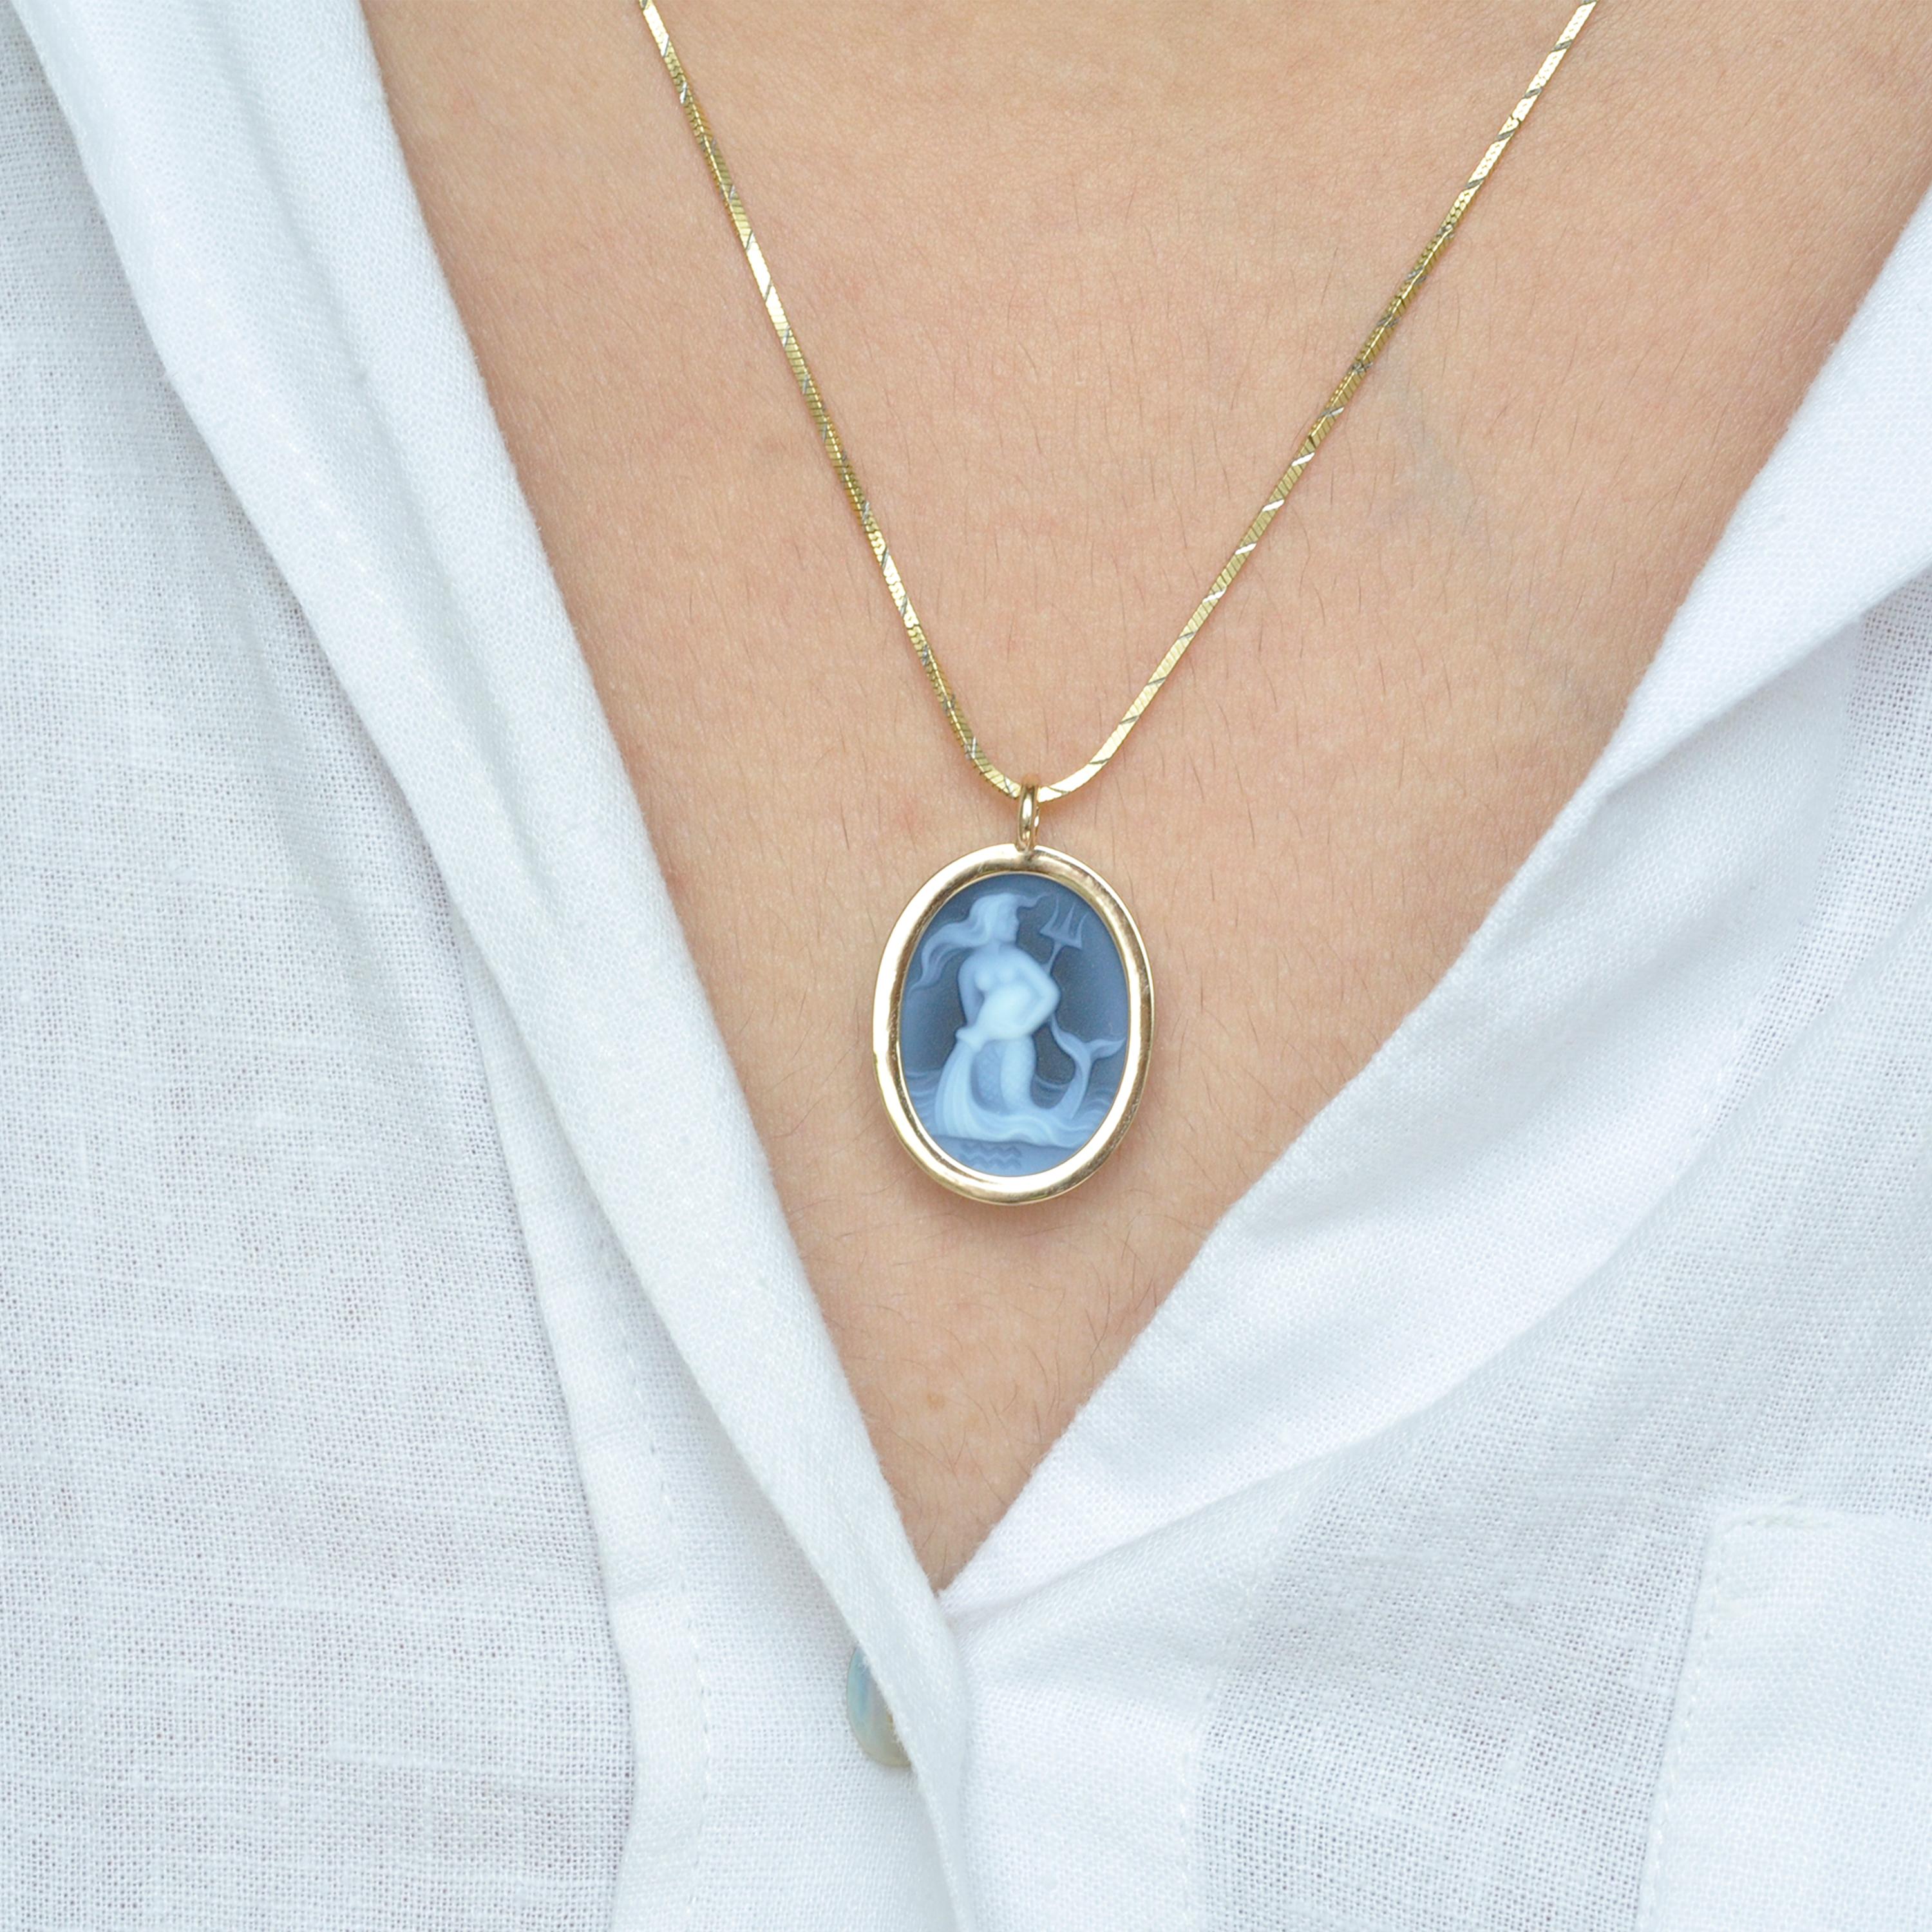 Reversible pendant necklace featuring aquarius sun sign carving cameo zodiac diamond in 14 karat gold.

Introducing our signature aquarius sun-sign zodiac carving cameo reversible pendant necklace from the zodiac collection. The pendant is set in 14